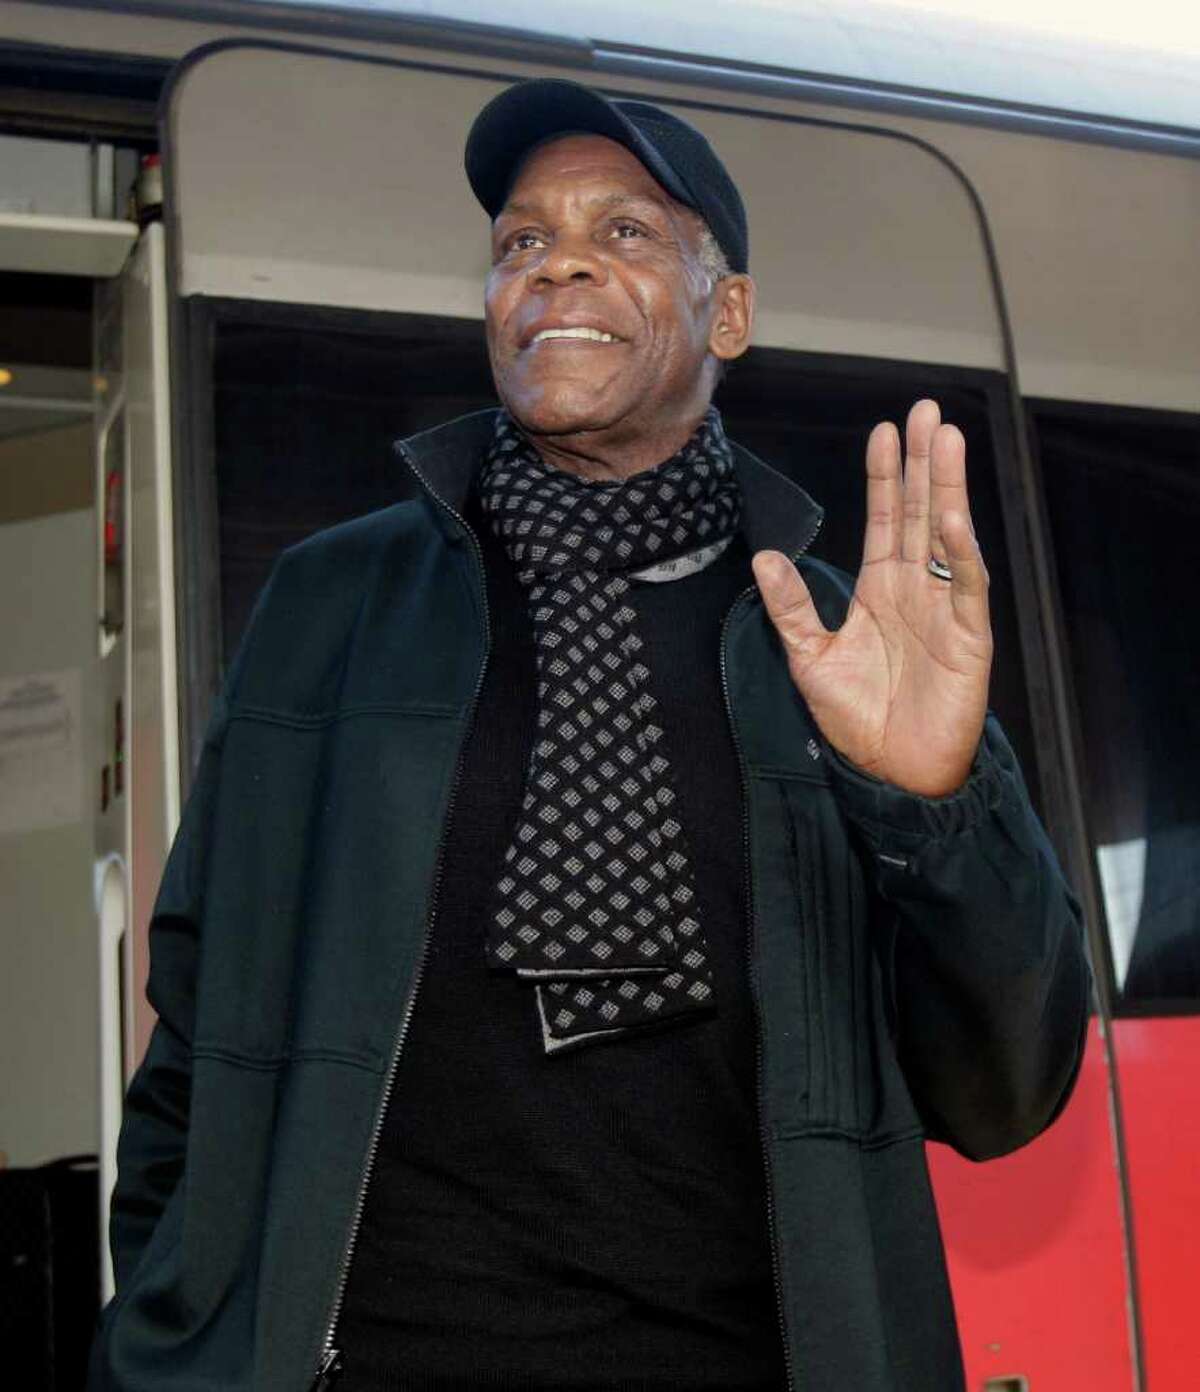 FILE - In this photo taken Friday, Feb. 4, 2011 file photo US actor Danny Glover gestures as he arrives at Rome's main train station. The lawyer of Haiti's Jean-Bertrand Aristide says actor Danny Glover has arrived in South Africa to escort the exiled former president home. Miami lawyer Ira Kurzban flew to Johannesburg Wednesday on the same mission amid unexplained delays as the United States called for Aristide to put off his departure until Sunday's disputed presidential runoff in his homeland. Kurzban says the star of the "Lethal Weapon" action movies arrived Thursday, March 17, 2011. (AP Photo/Pier Paolo Cito, File)